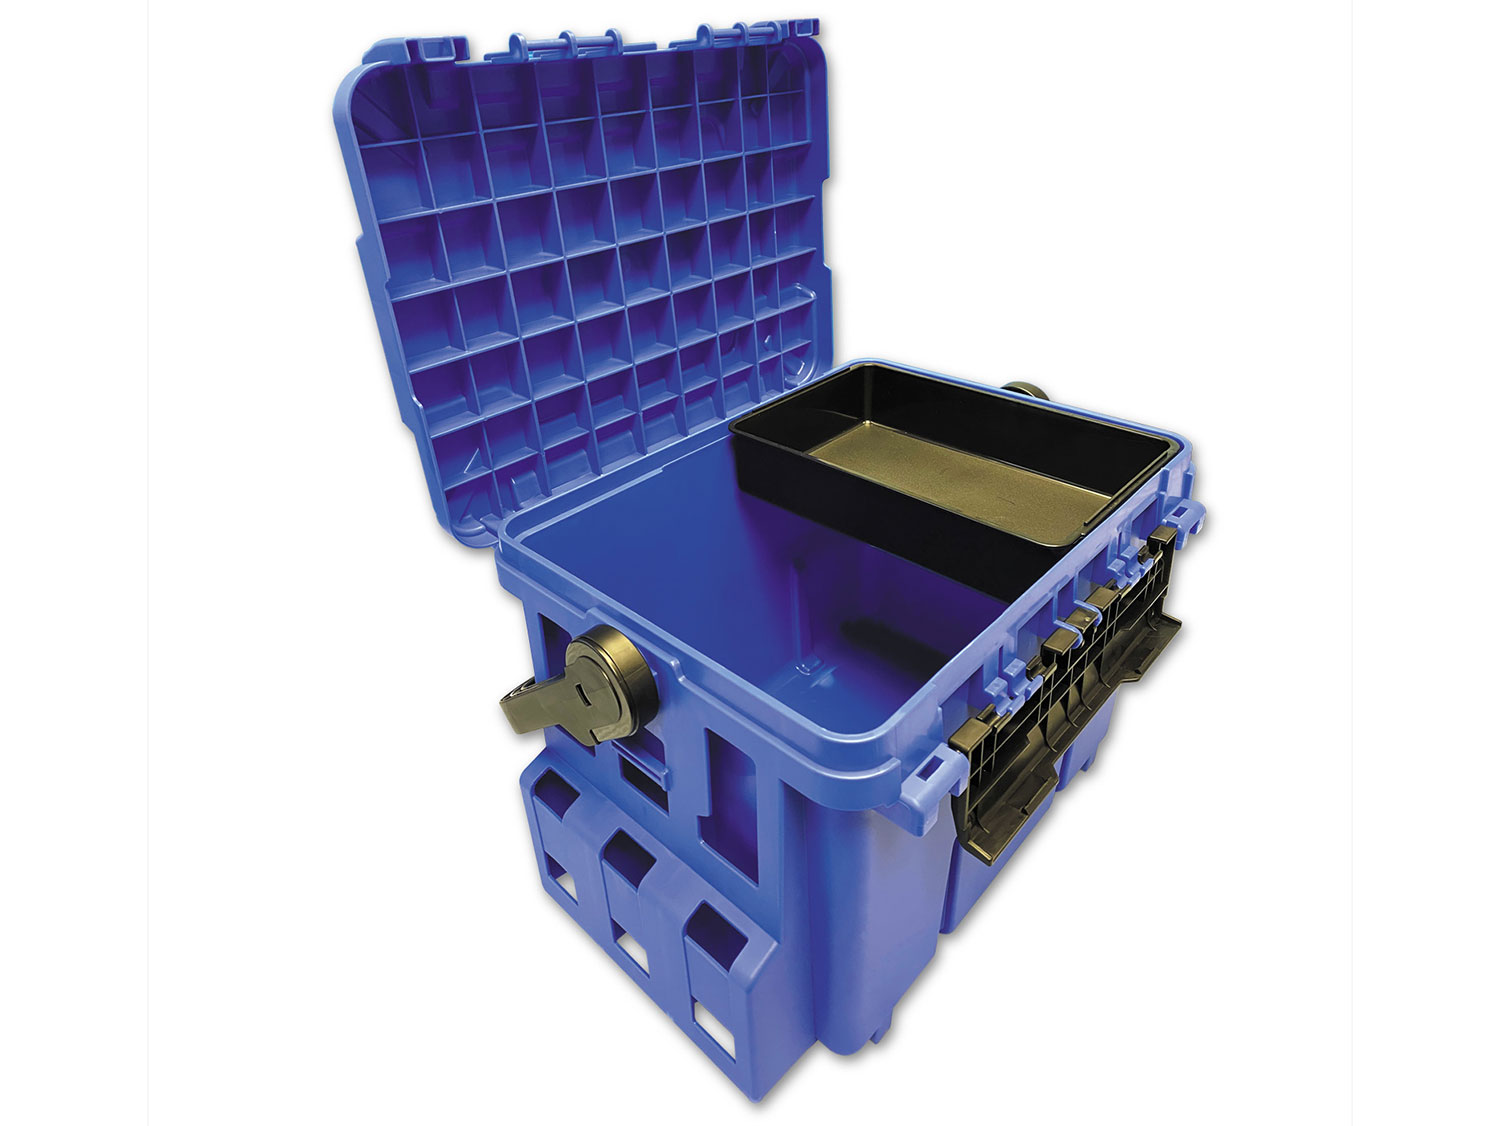 A blue tackle box on a white background.